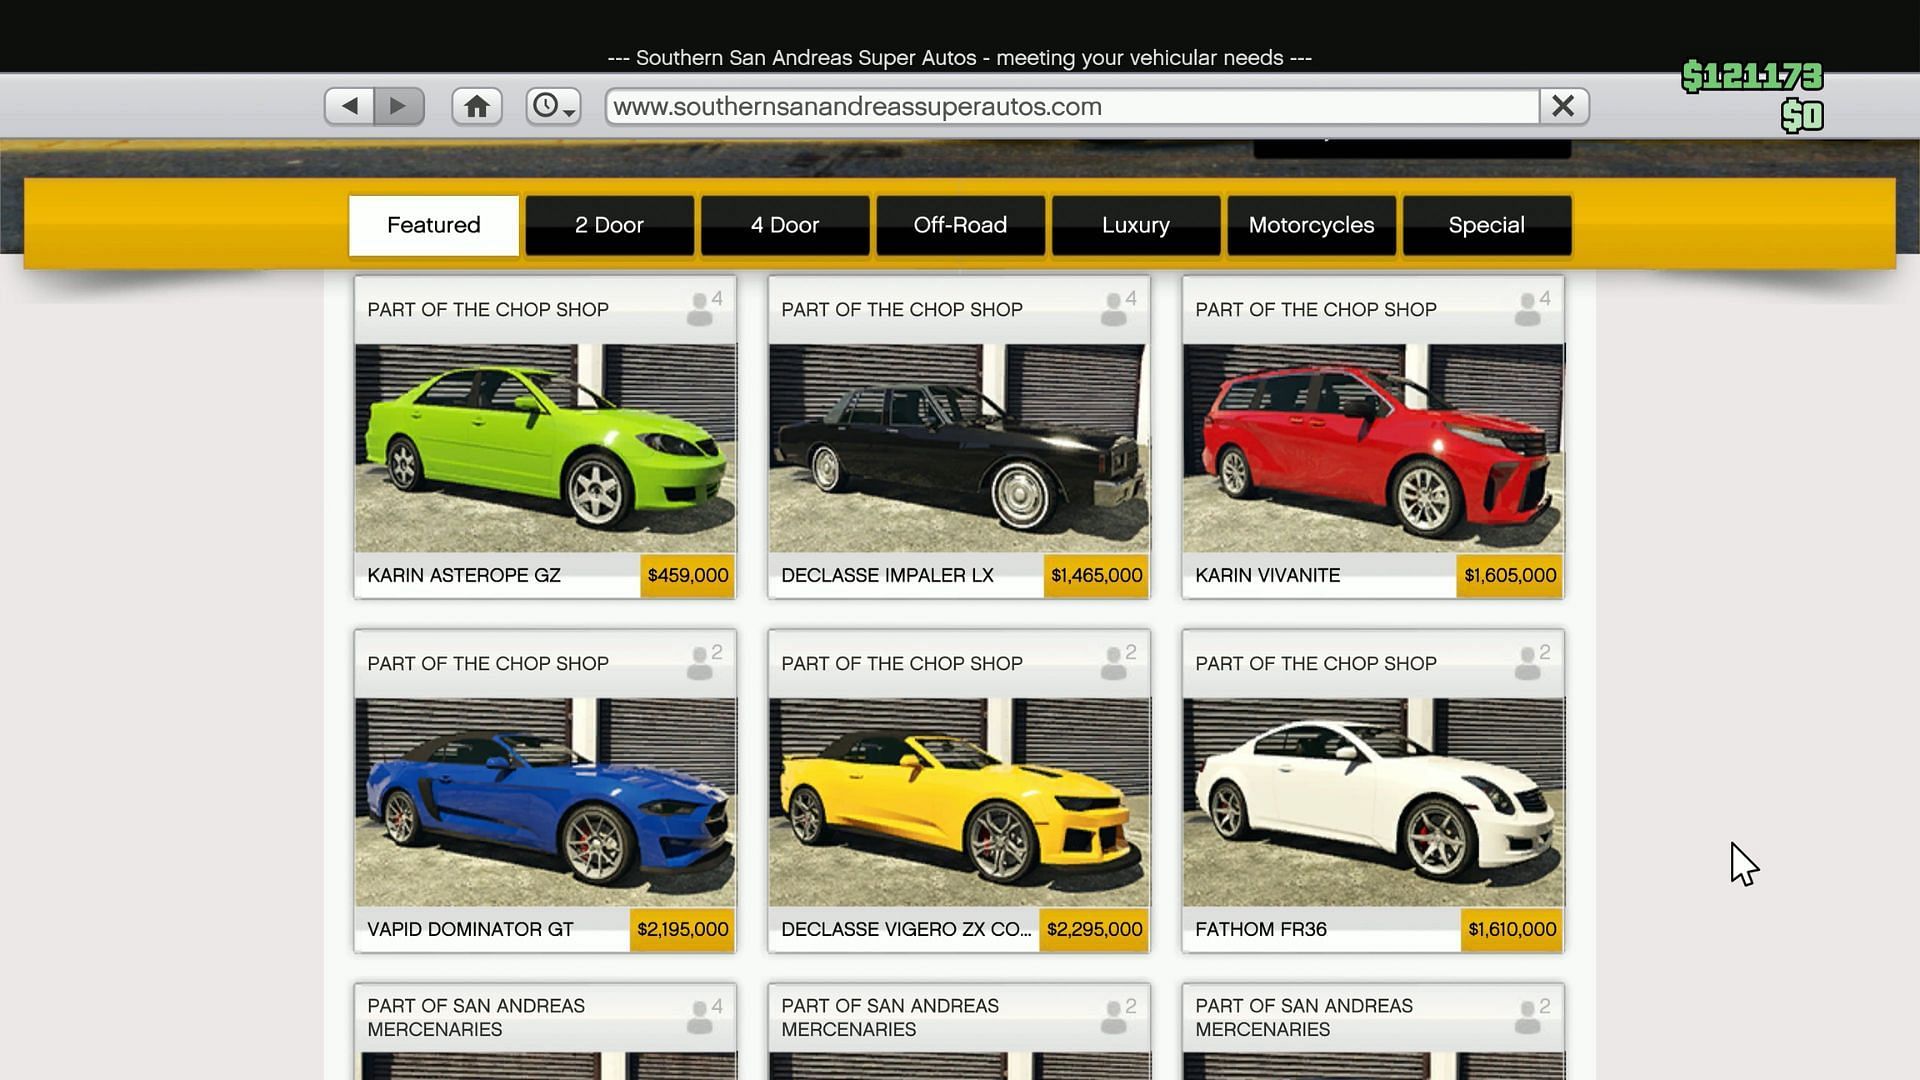 All new vehicles on the Southern San Andreas Super Autos website in Grand Theft Auto Online (Image via X/@morsmutual_)